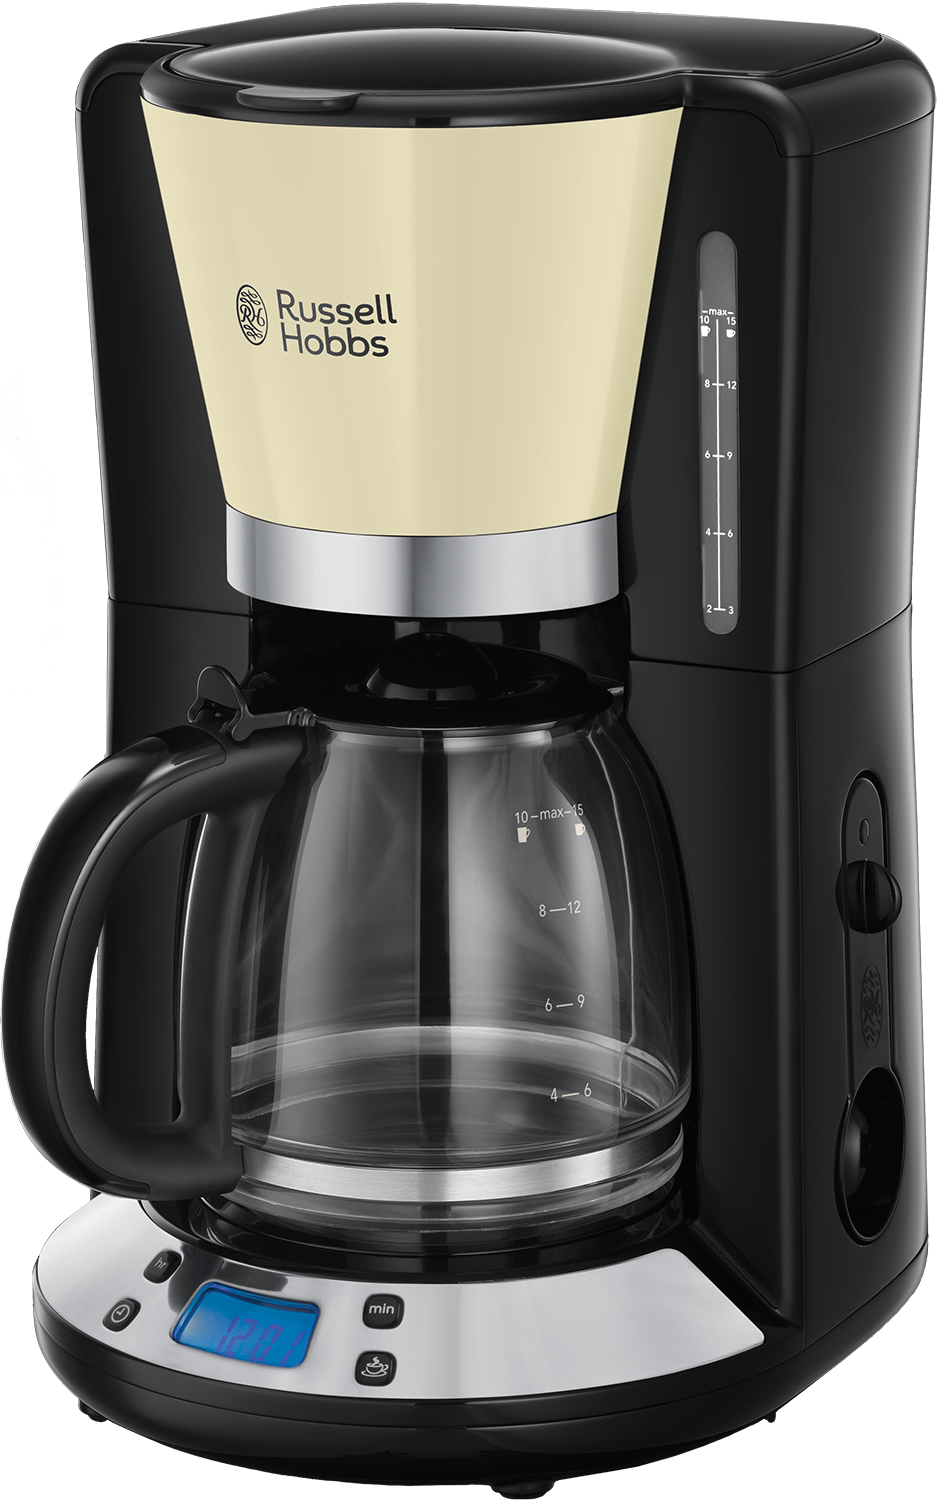 Russell Hobbs Hobbs Colours Plus Creme